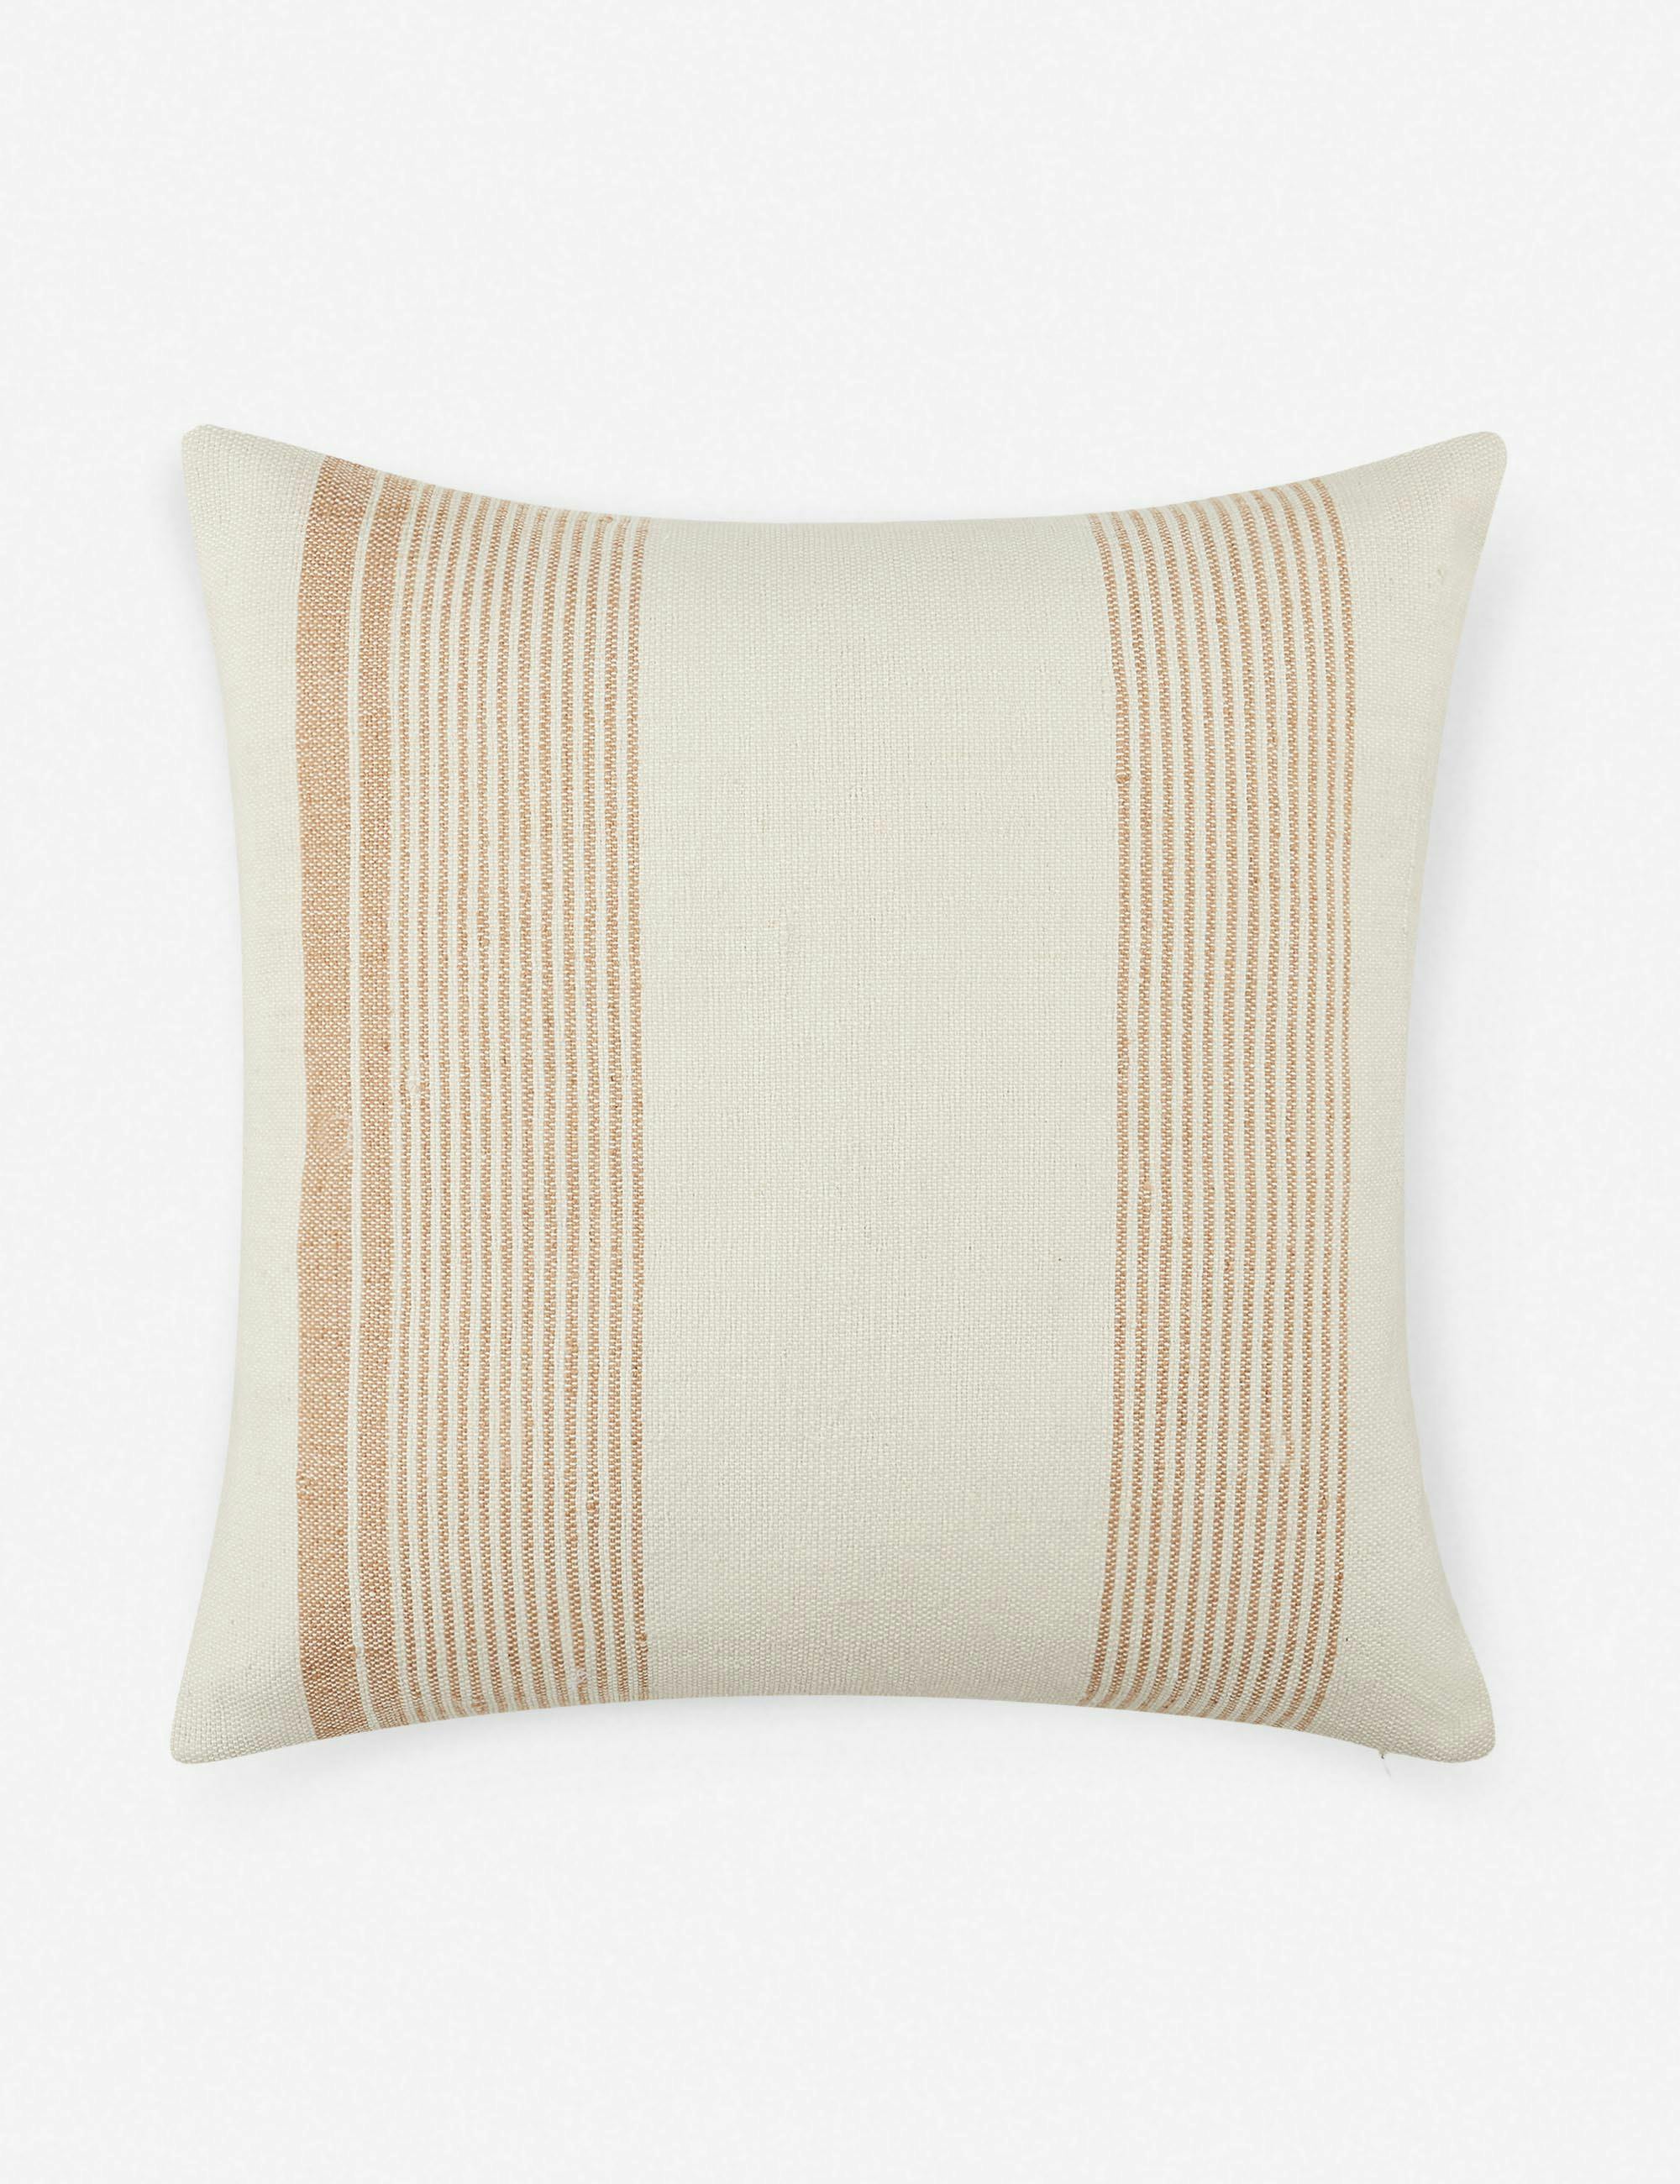 Kristian 20"x20" Natural Striped Indoor/Outdoor Pillow